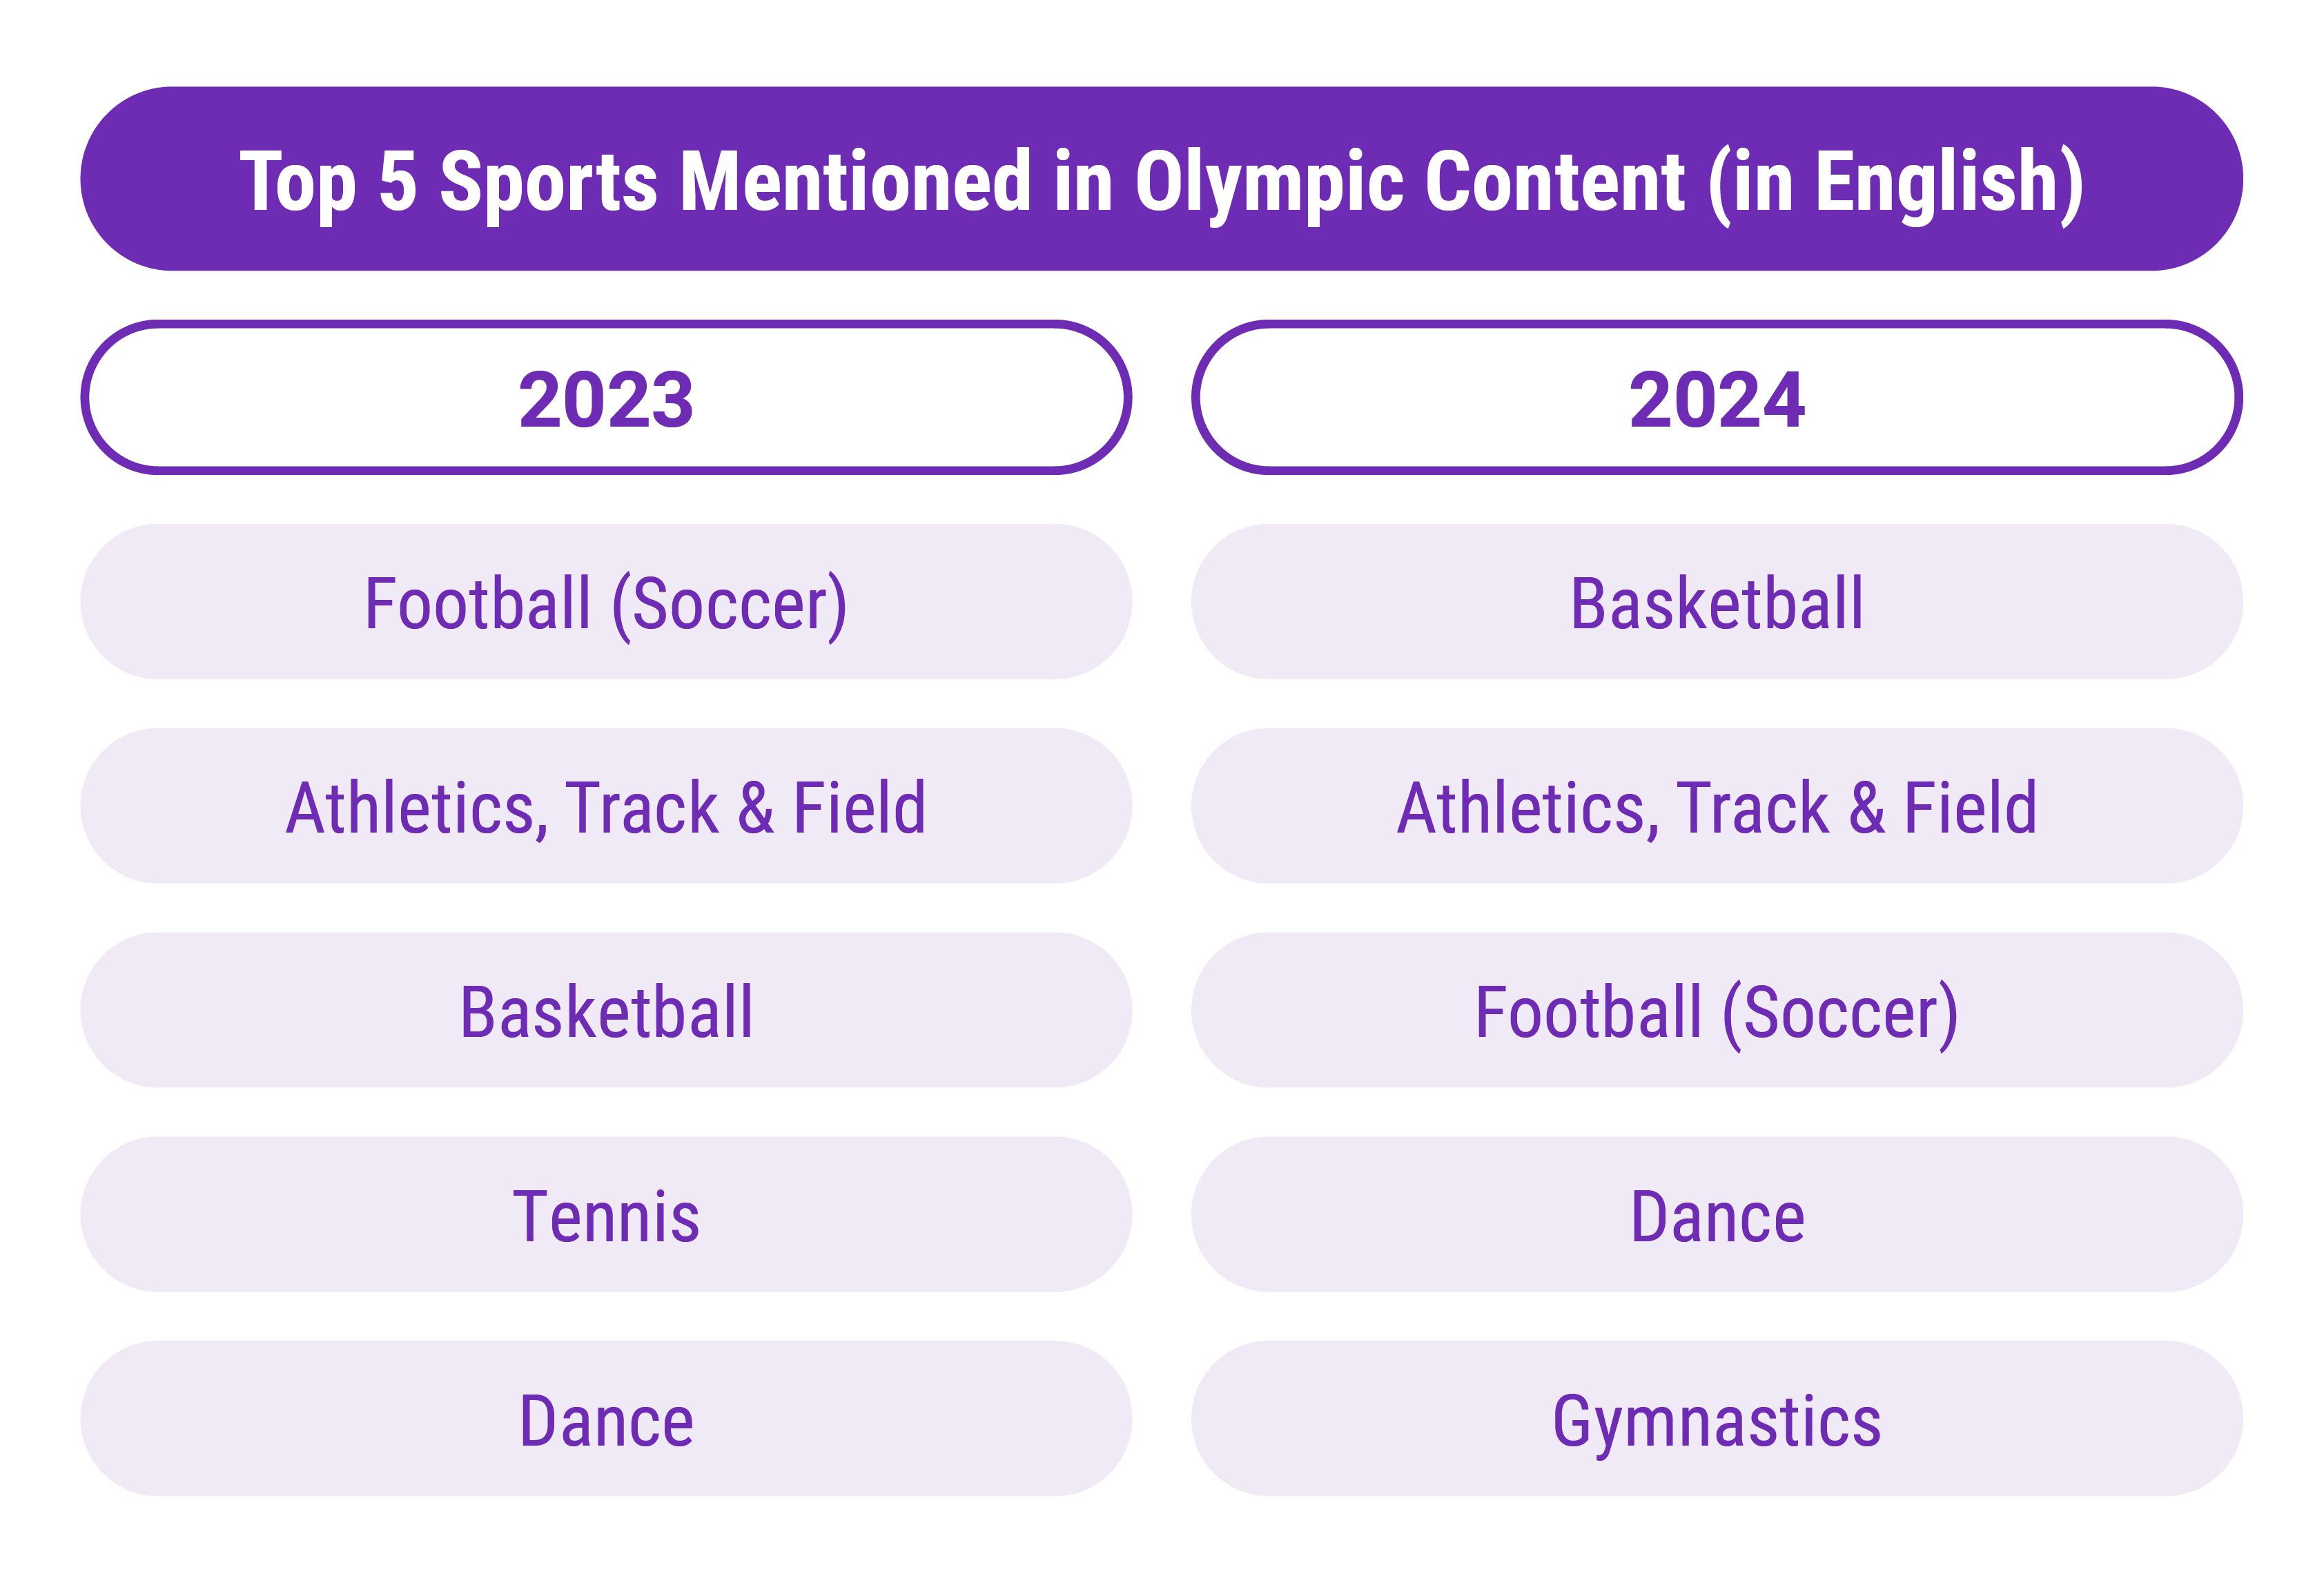 Data visualization in the color purple showing a chart entitled "Top 5 Sports Mentioned in Olympic Content (in English)." The chart is divided by 2023 and 2024. In 2023, the top 5 sports (in order) were: football (soccer), athletics, track & field, basketball, tennis, and dance. In 2024, the top 5 sports (in order) were: basketball, athletics, track & field, football (soccer) dance, and gymnastics.